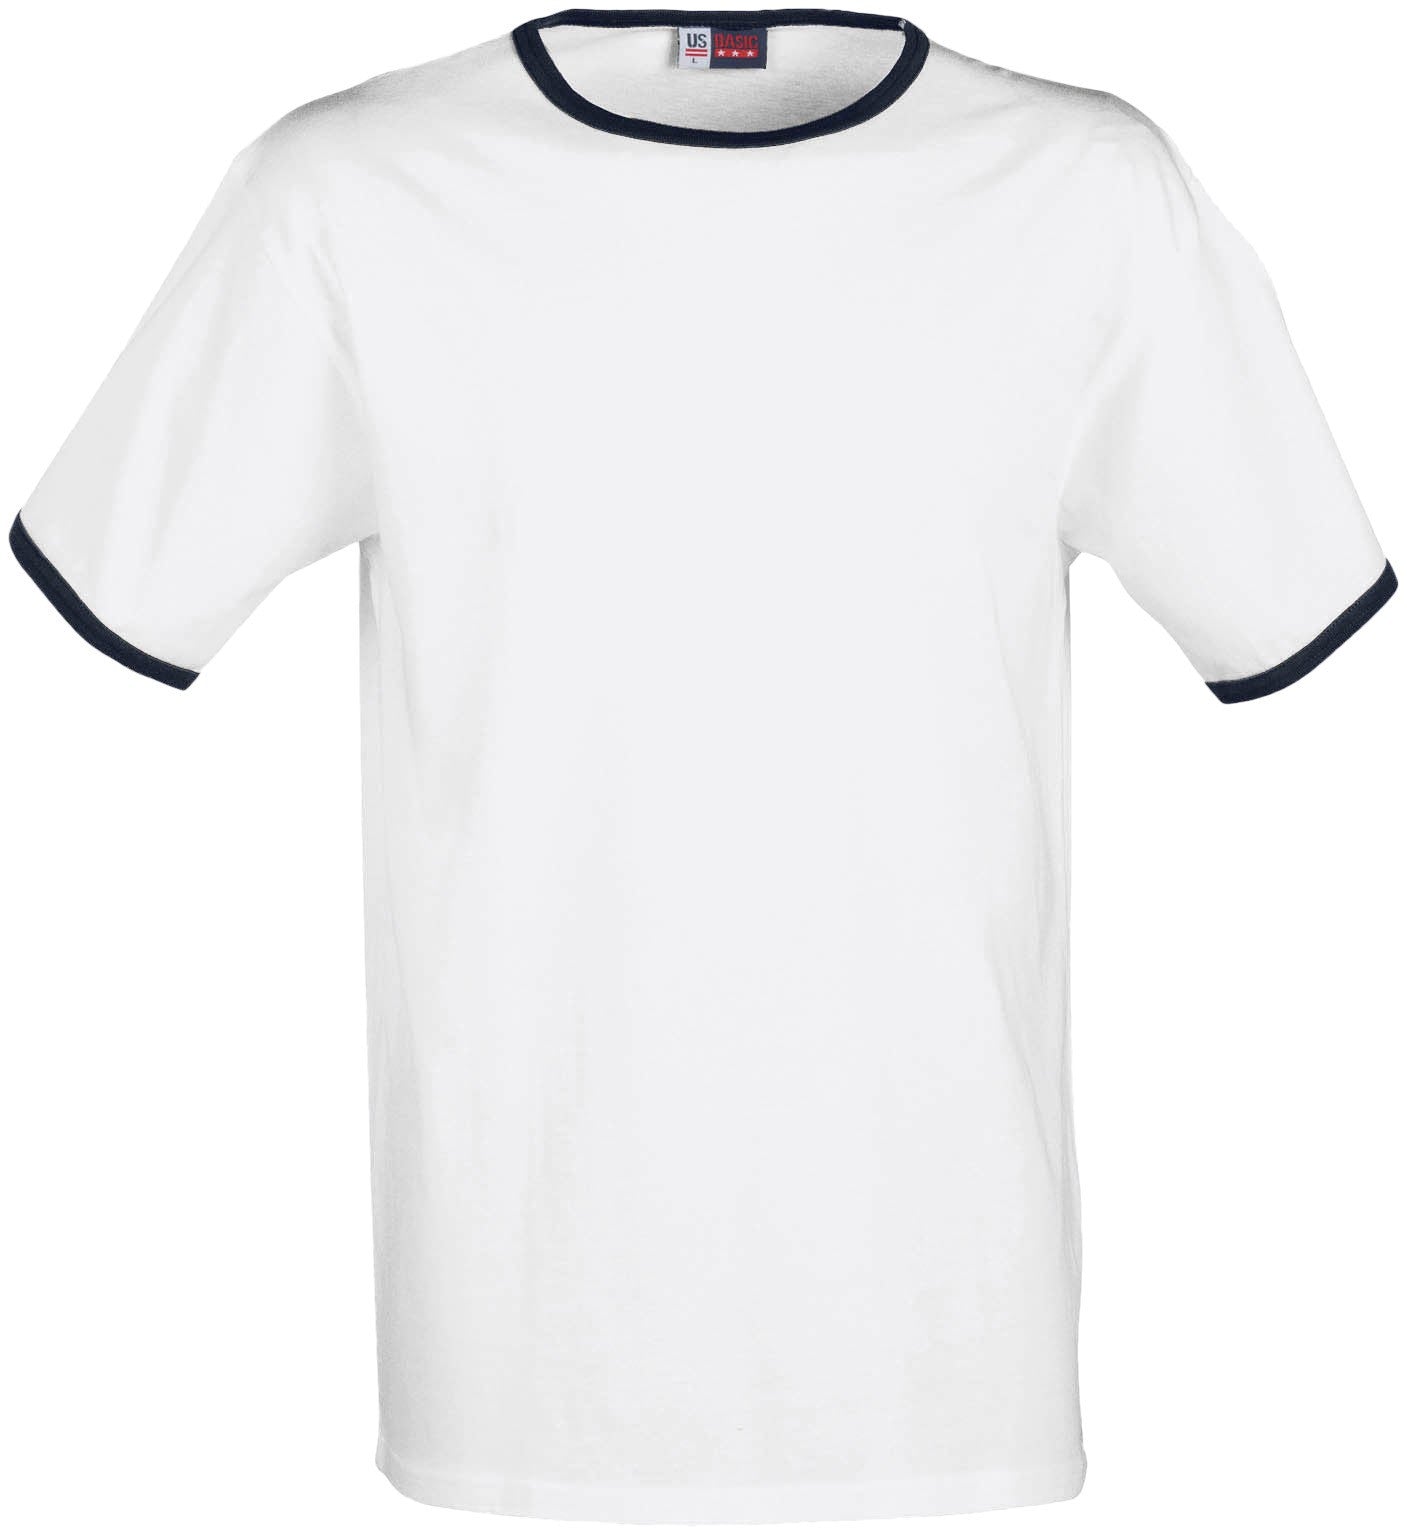 Mens Adelaide Contrast T-Shirt - White with Navy Only